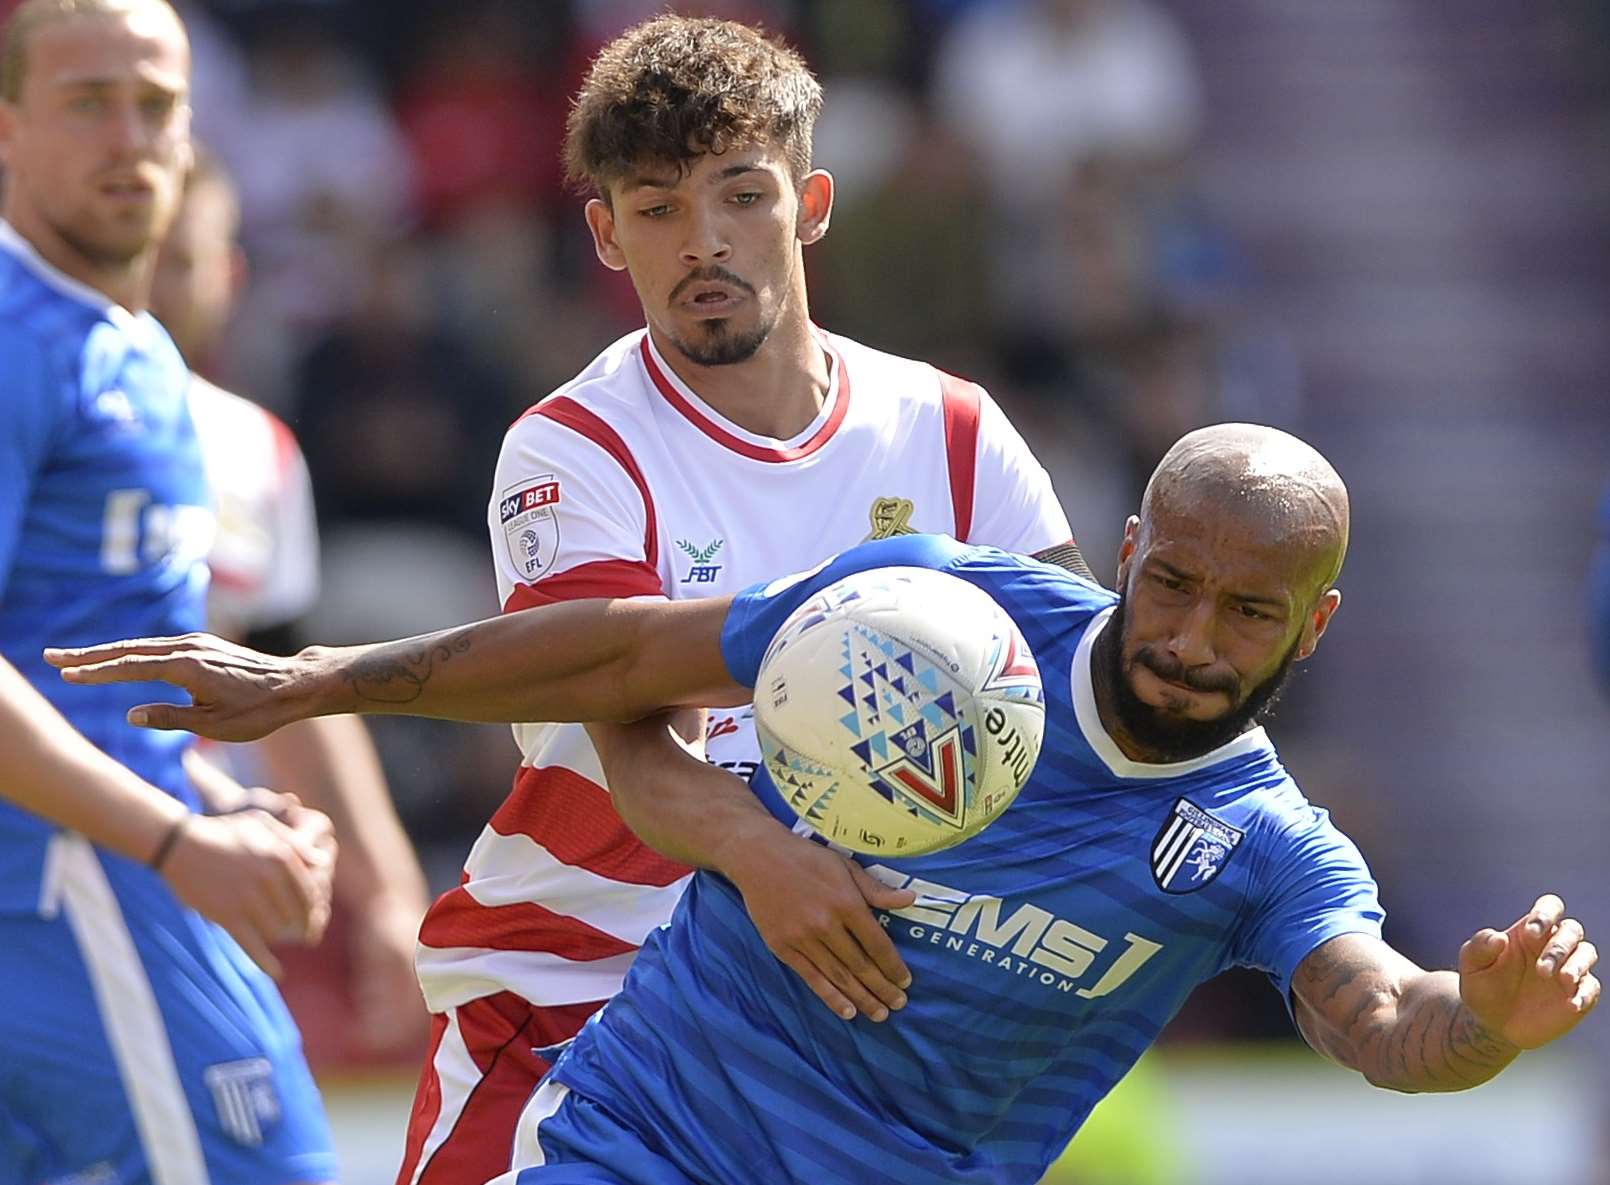 Josh Parker in action against Doncaster. Picture: Ady Kerry